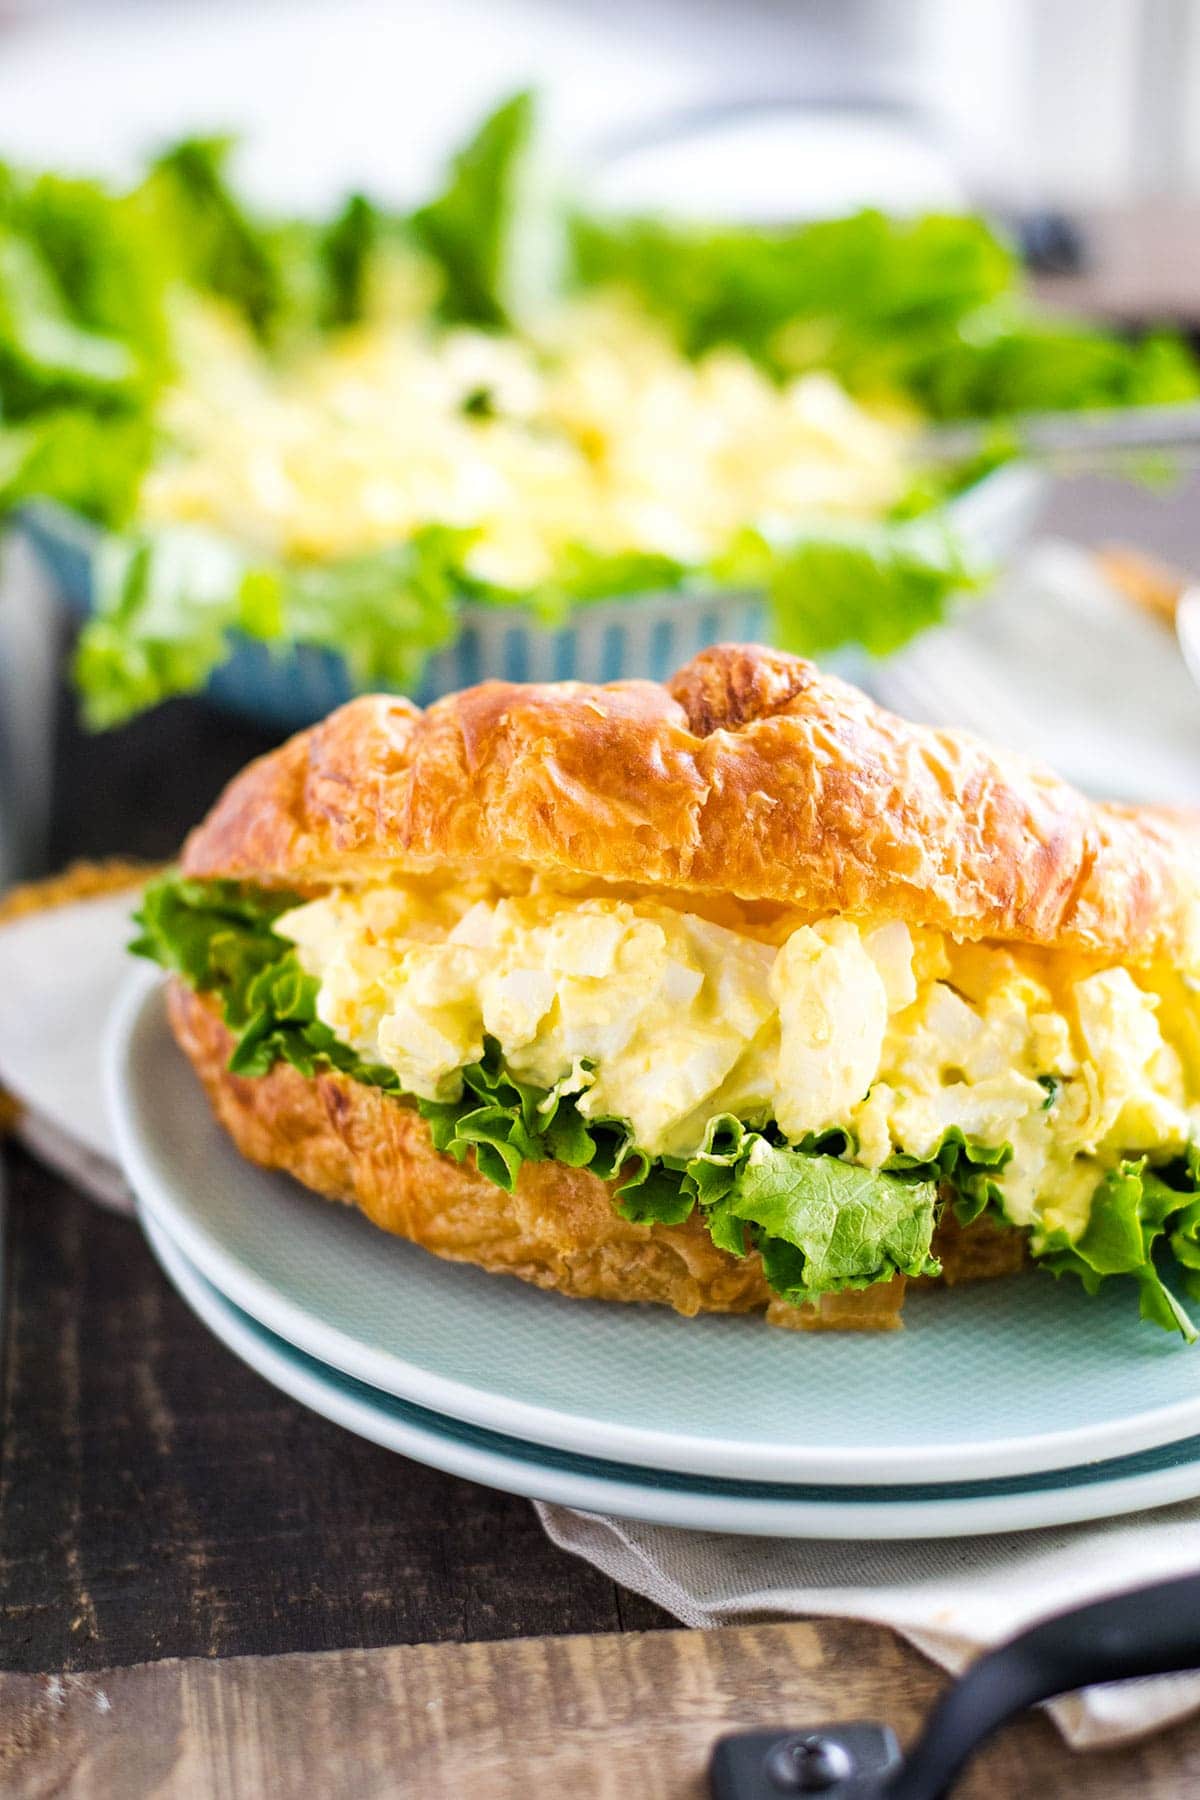 Egg salad with a lettuce leaf on a croissant roll.